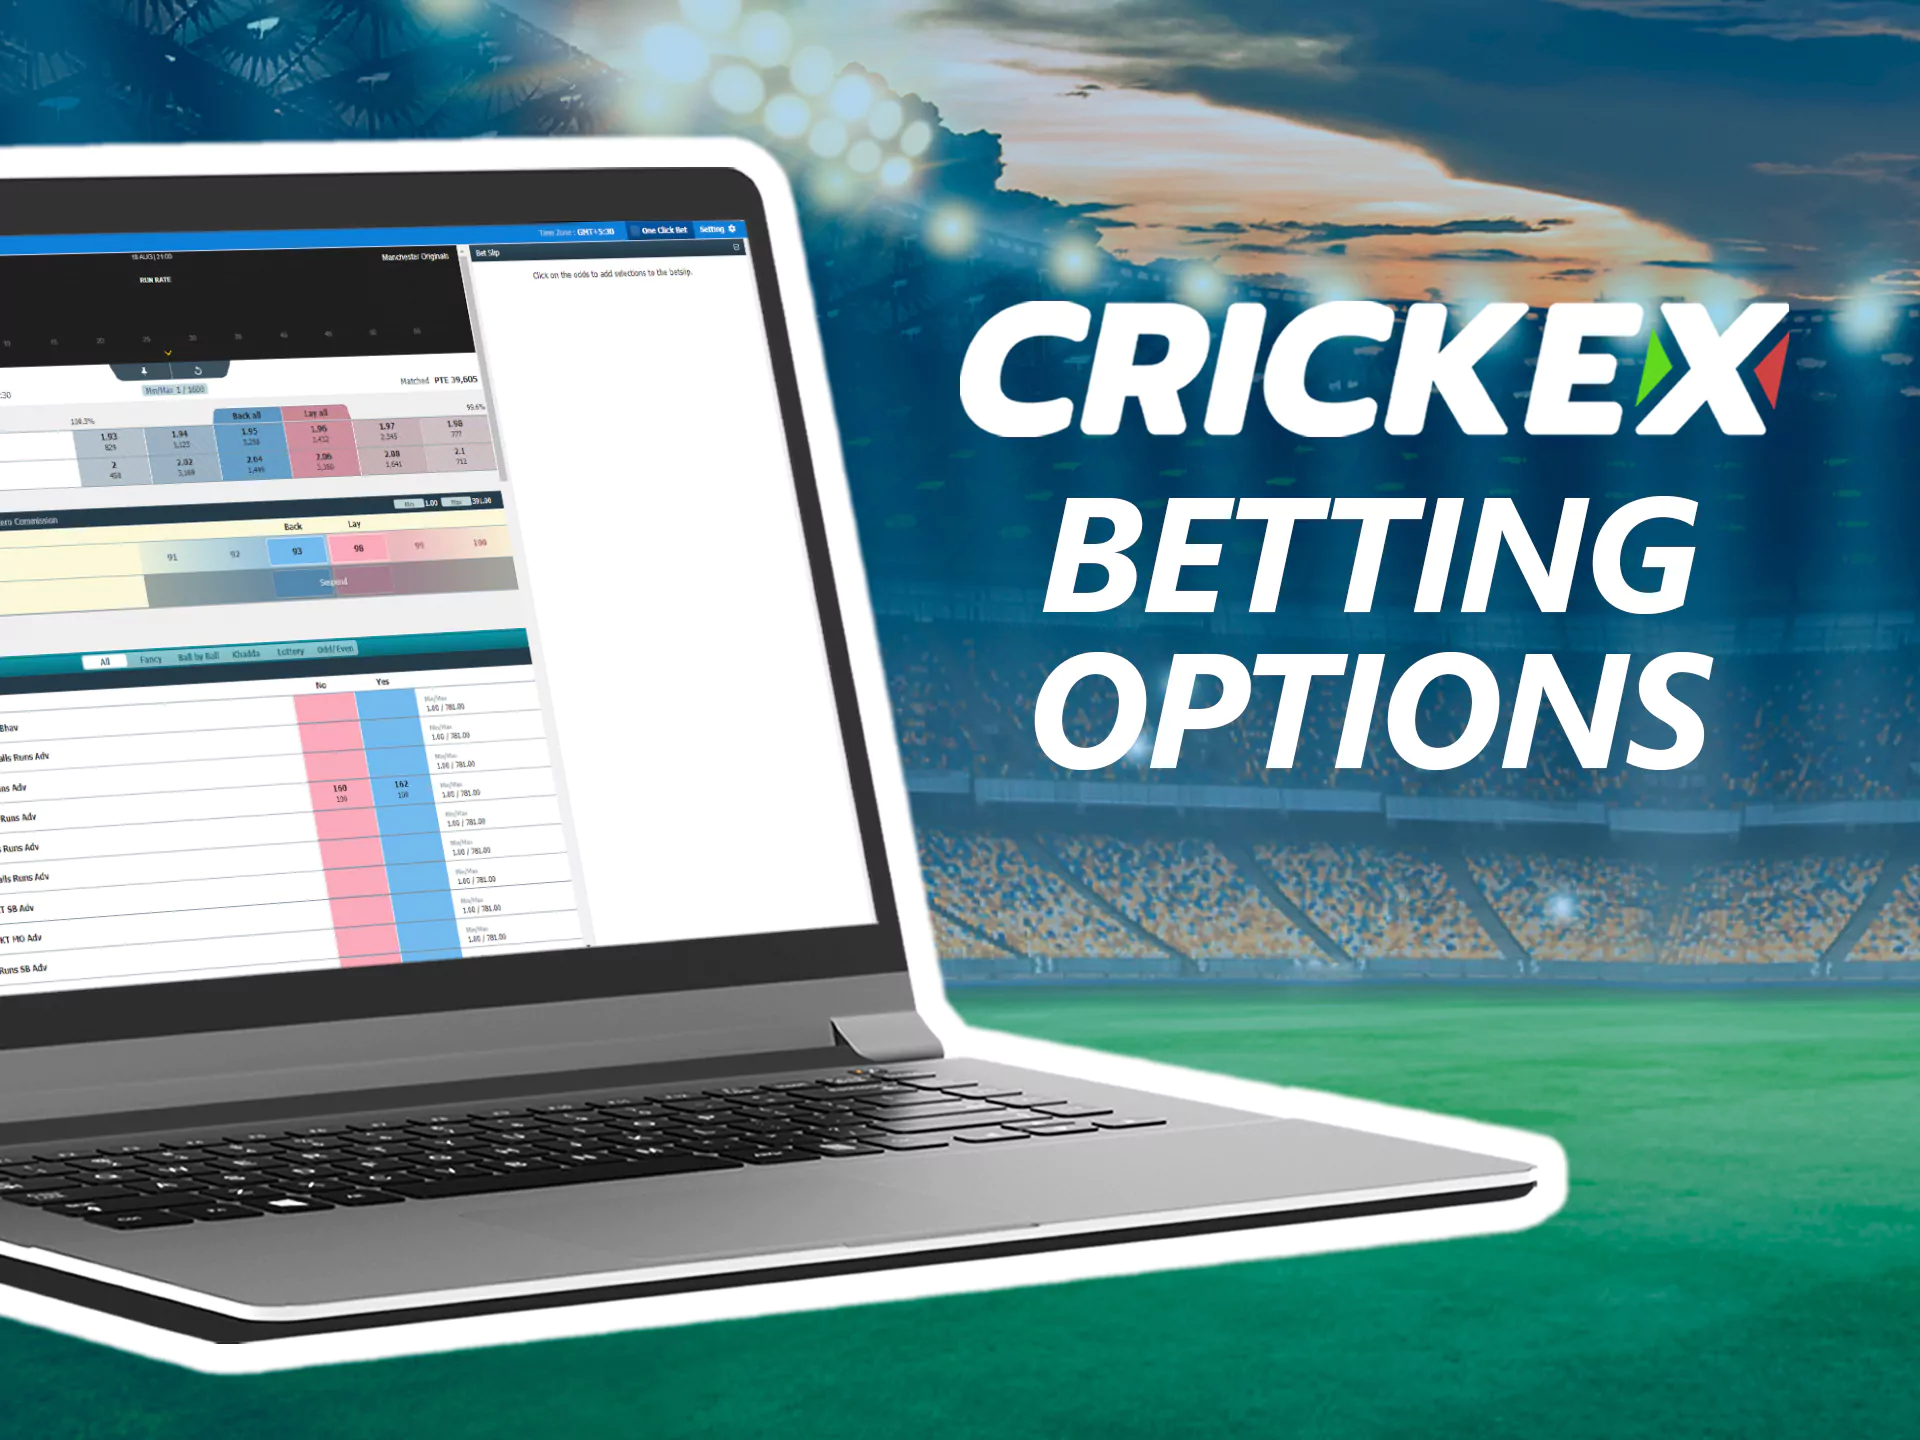 Crickex offers a variety of options for sports betting.